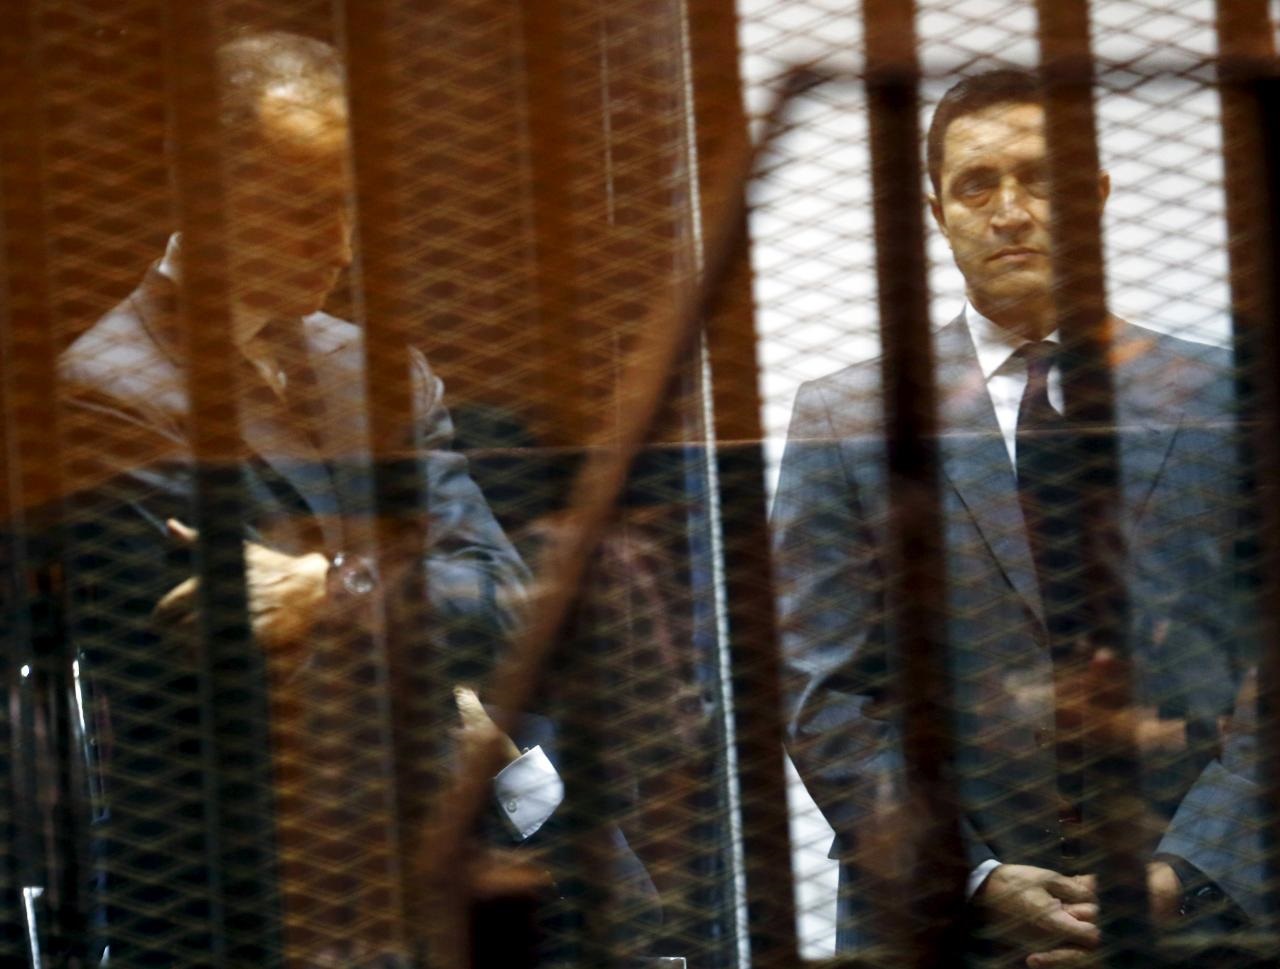 gamal l and alaa mubarak sons of egypt 039 s former president hosni mubarak react behind bars during their trial with their father not pictured inside a dock at the police academy on the outskirts of cairo may 9 2015 photo reuters